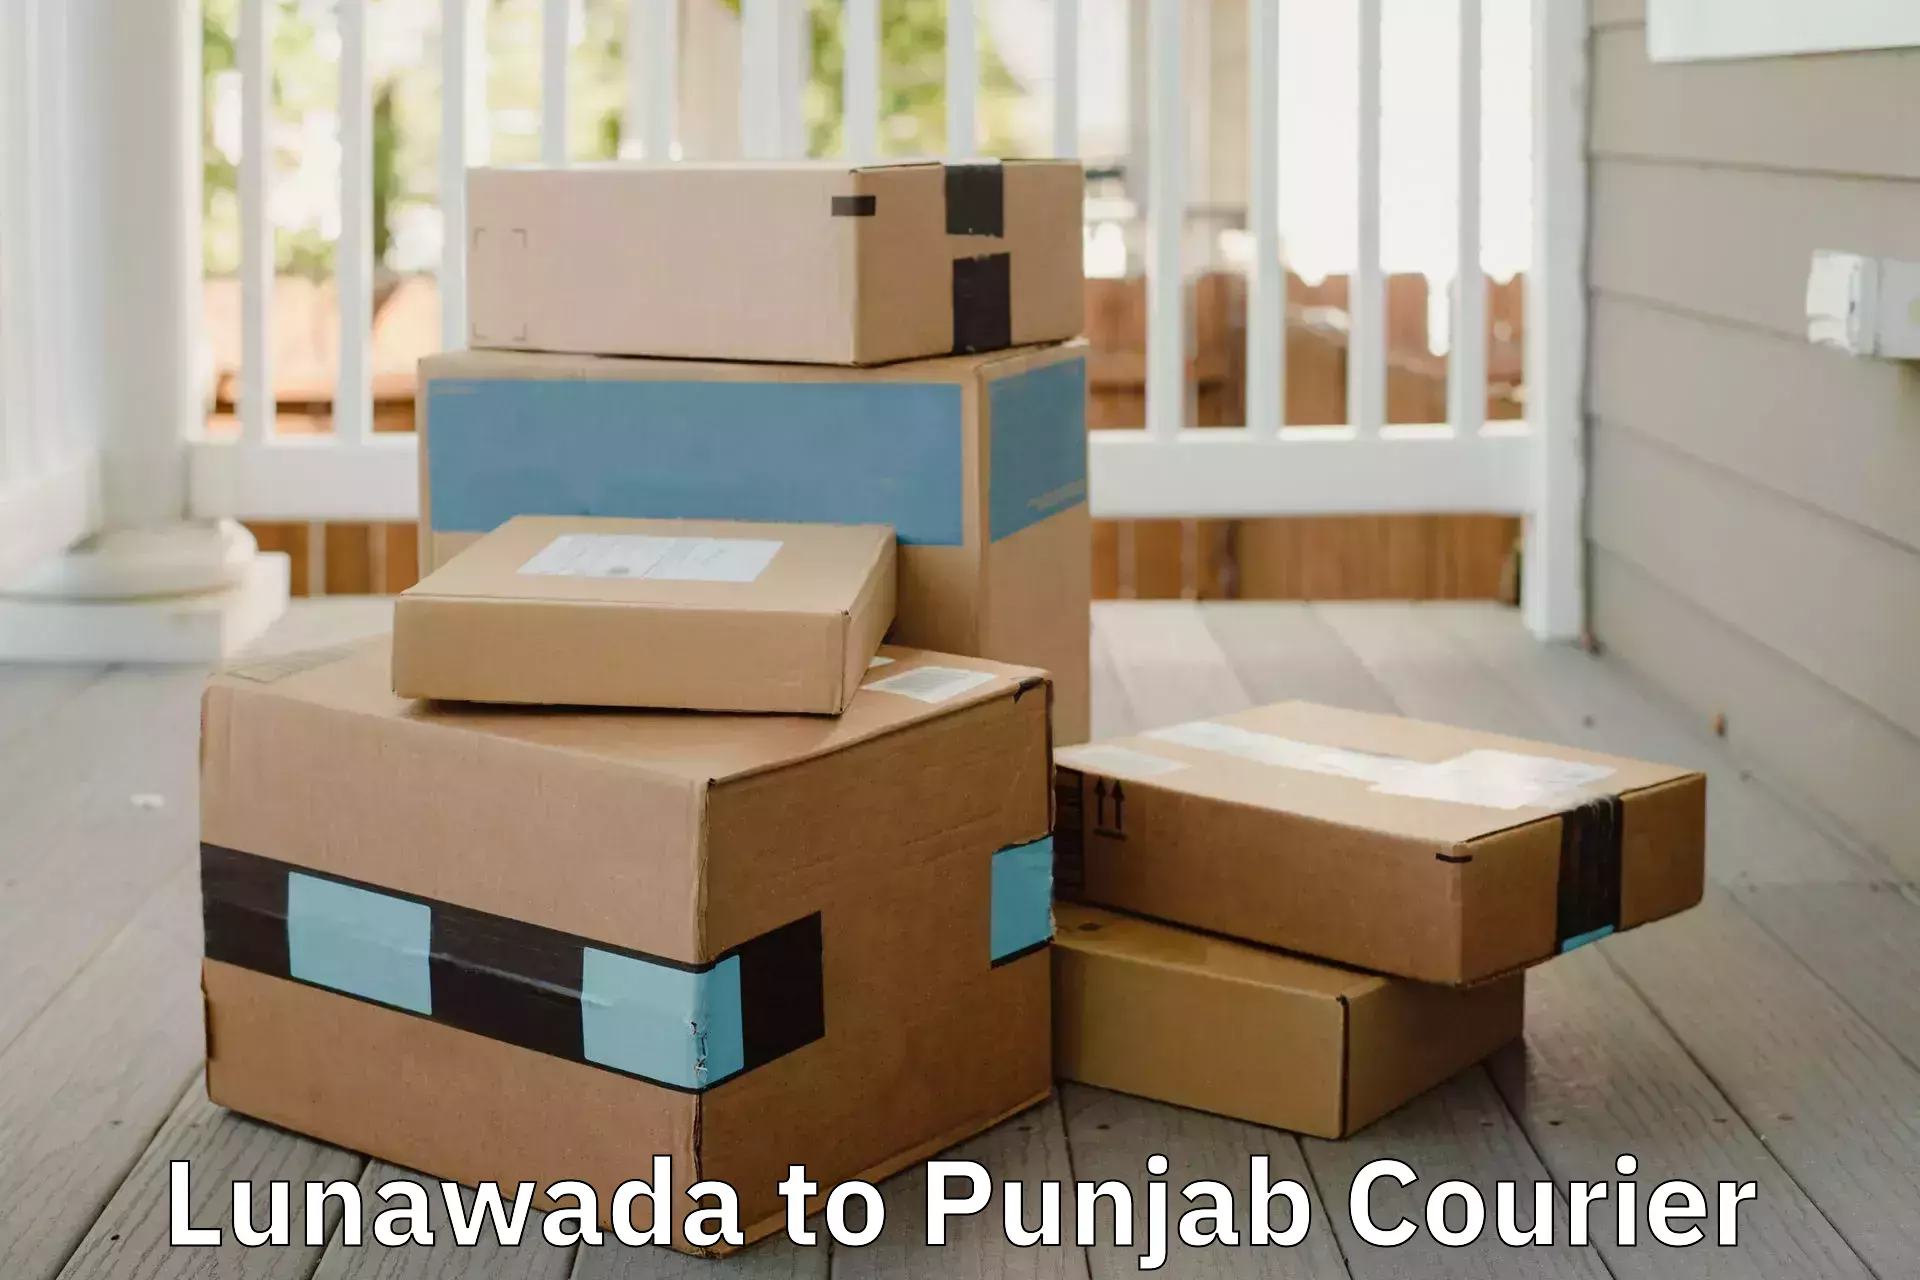 Quality relocation services Lunawada to Amritsar